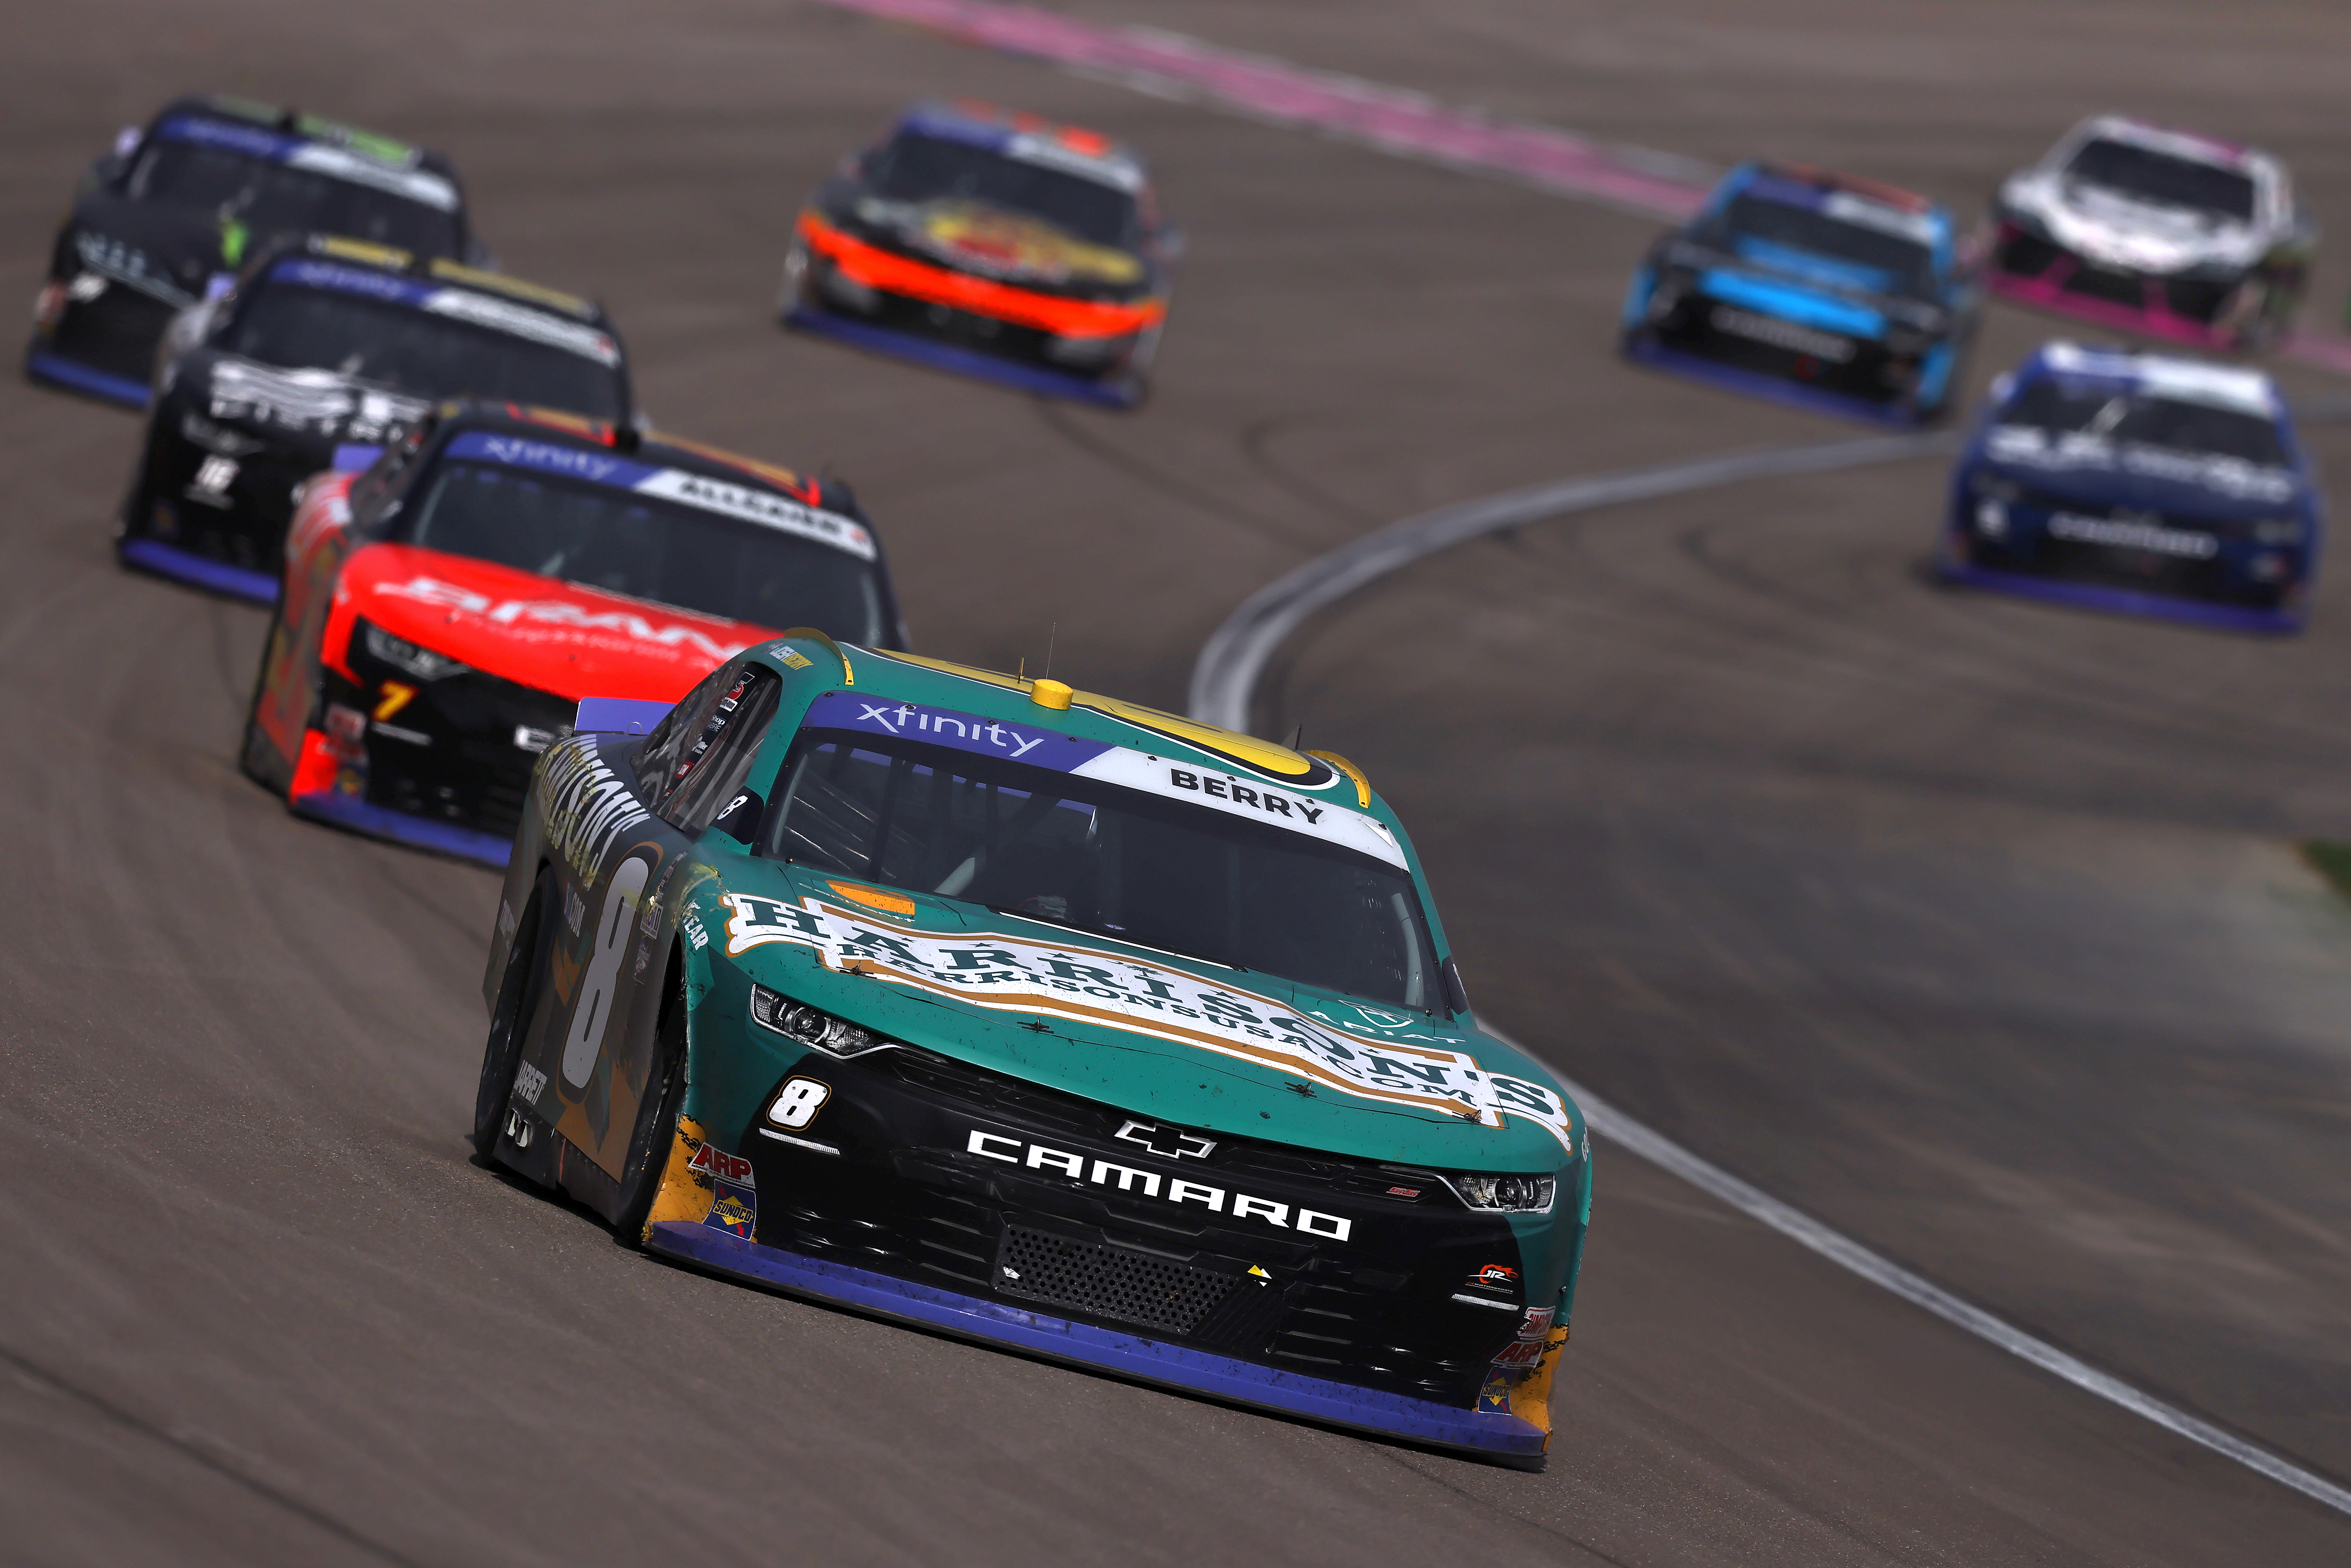 Josh Berry, driver of the #8 Harrison’s USA Chevrolet, leads the field during the NASCAR Xfinity Series Alsco Uniforms 302 at Las Vegas Motor Speedway on October 15, 2022 in Las Vegas, Nevada.